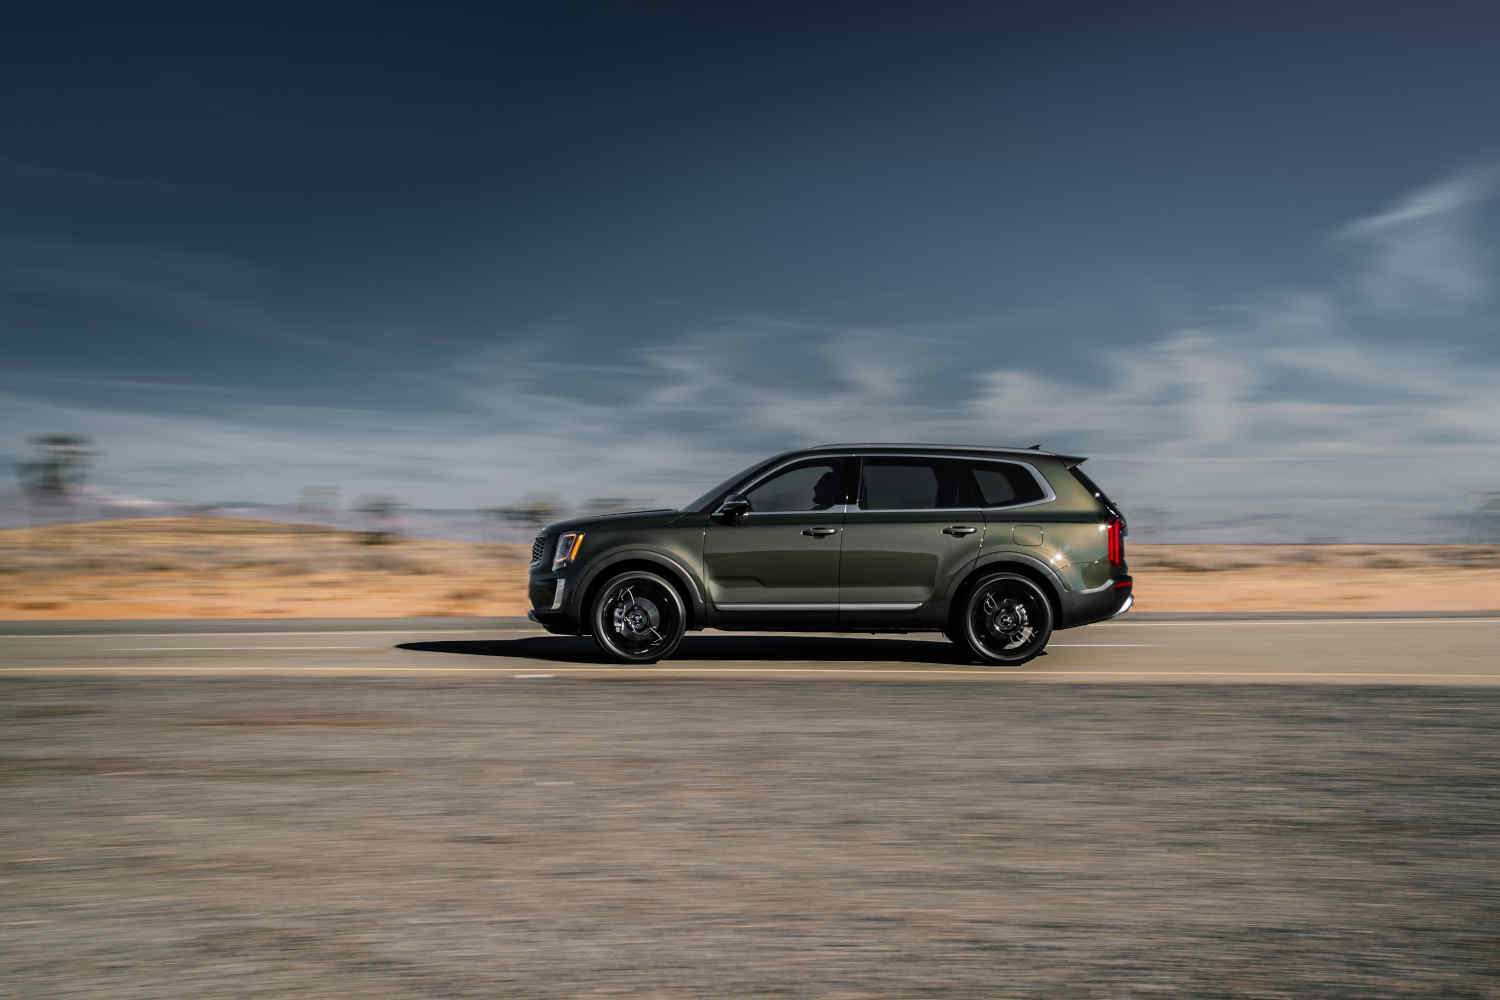 Find out what breaks on the Kia Telluride seen here in 2019